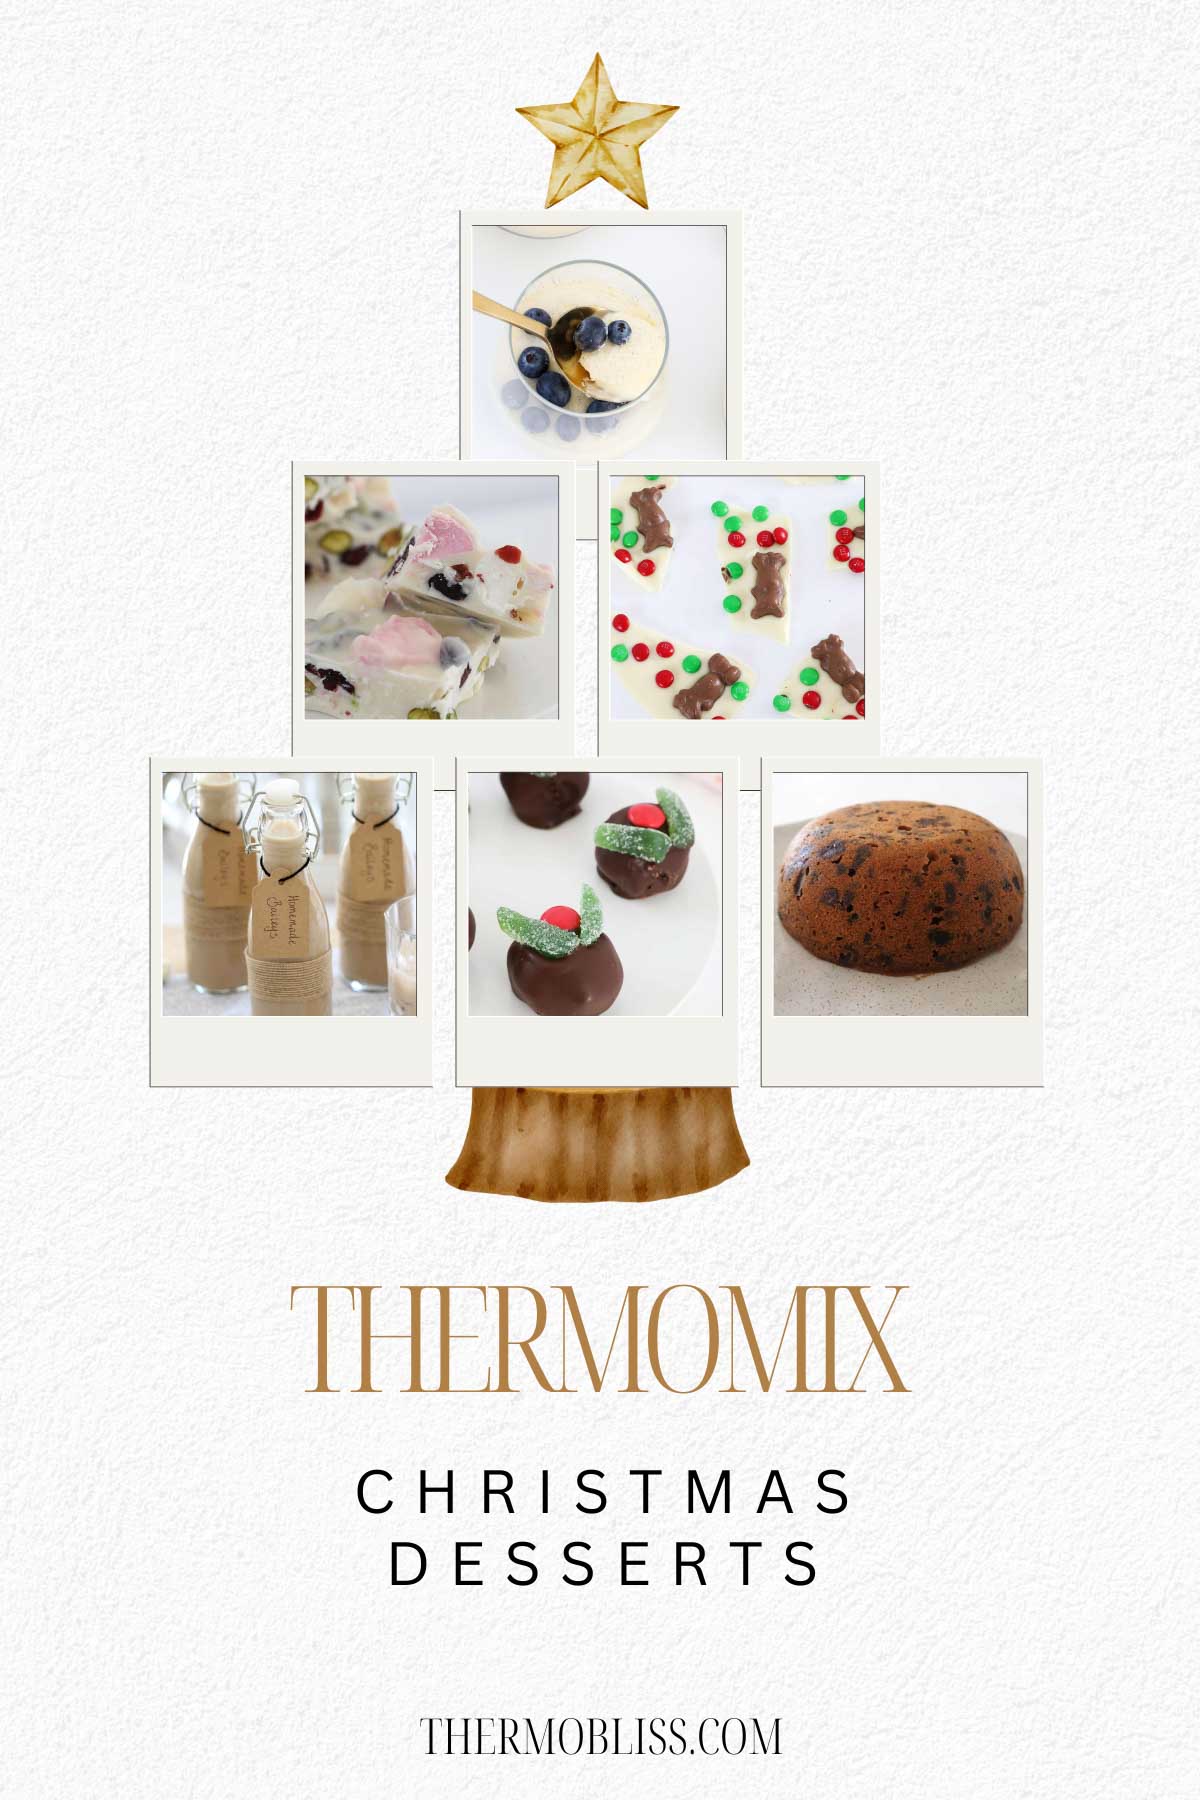 A collage of Thermomix Christmas desserts.